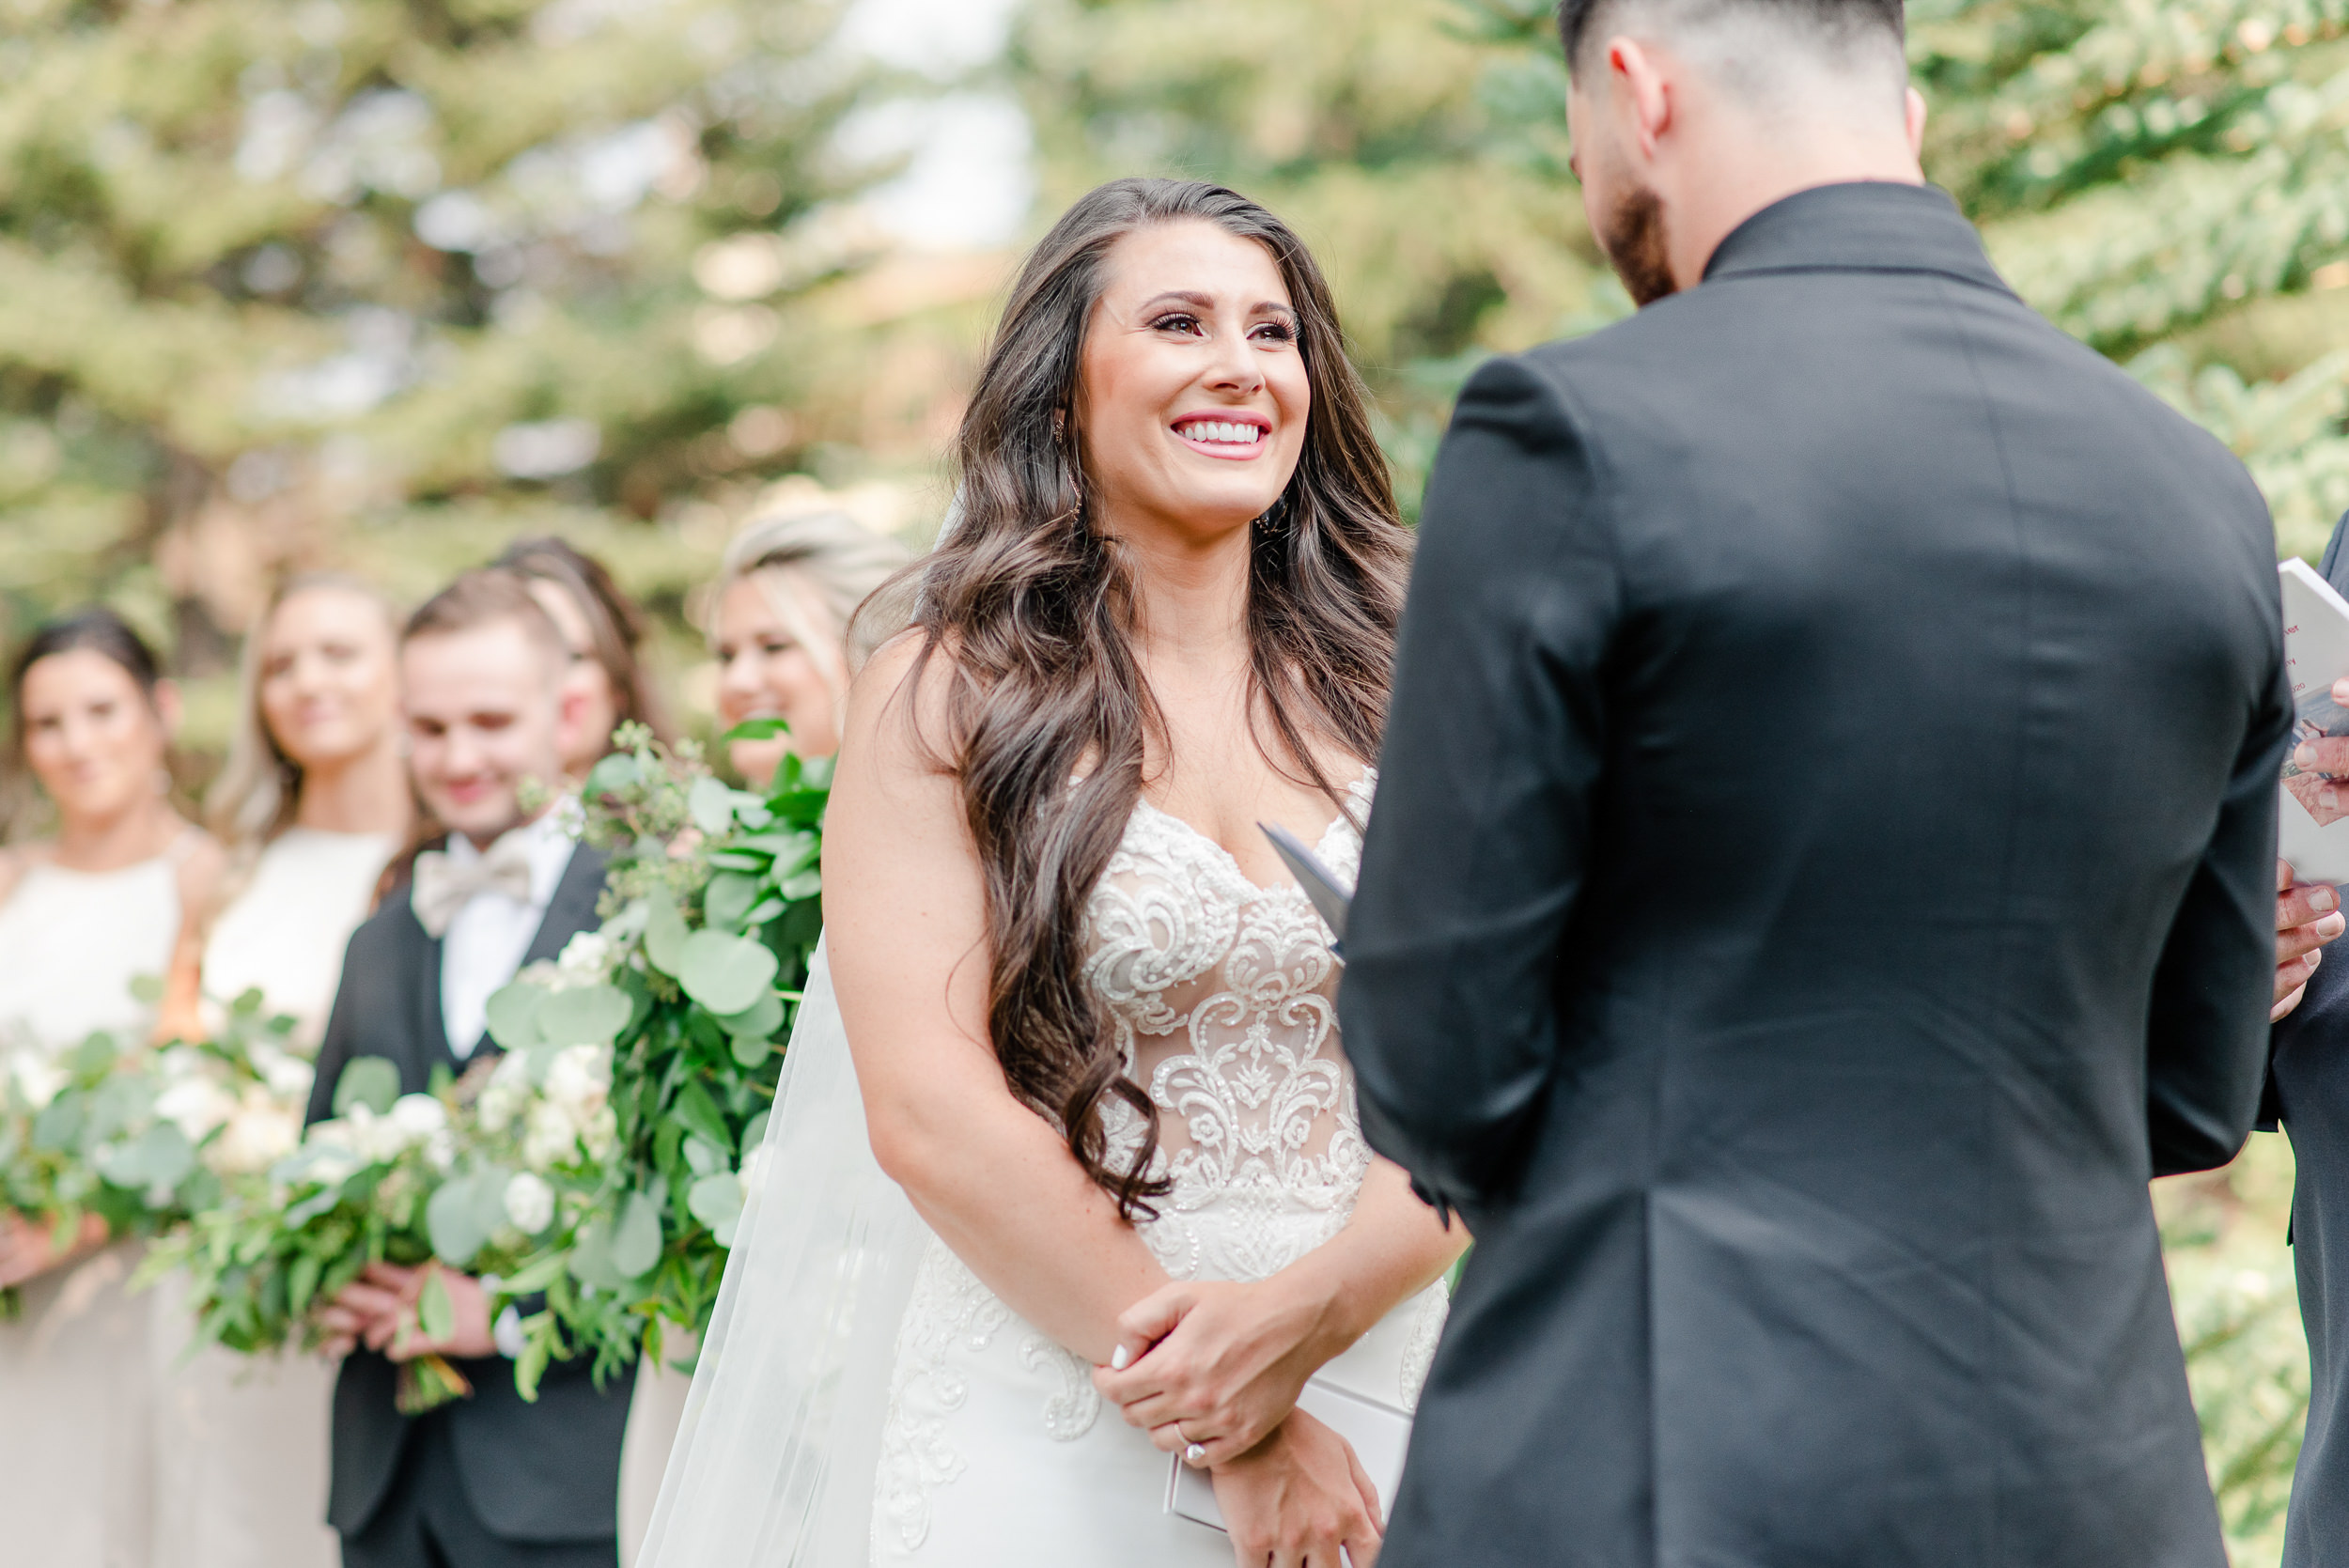 During an outdoor wedding ceremony at the Sonnenalp Hotel in Vail a bride smiles at her Groom as he reads his vows to her.